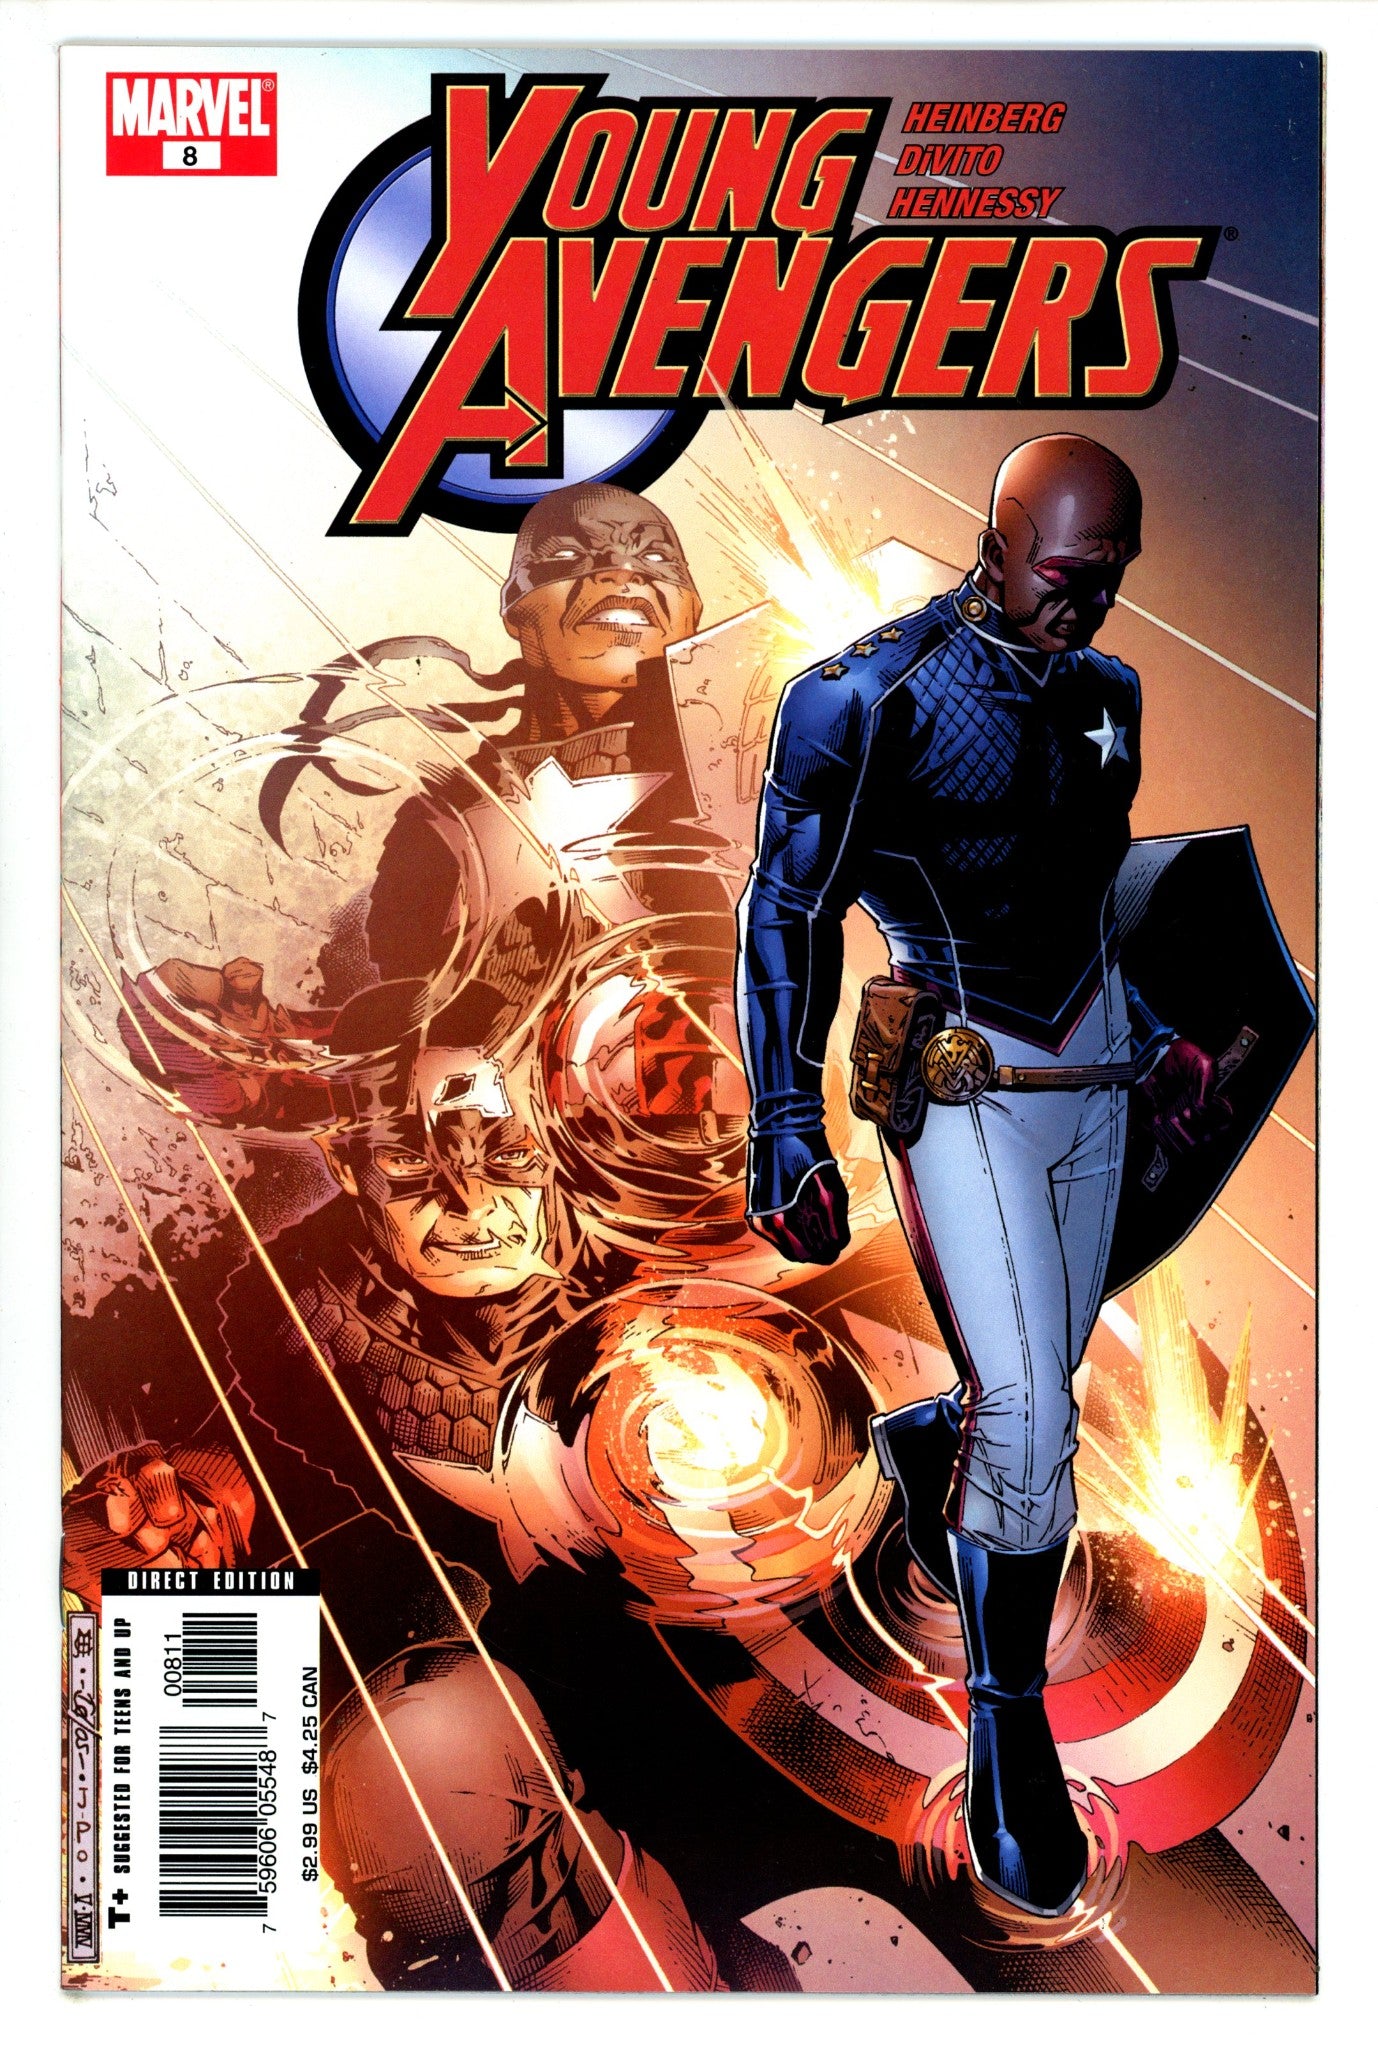 Young Avengers Vol 1 8 VF+ (8.5) (2005)